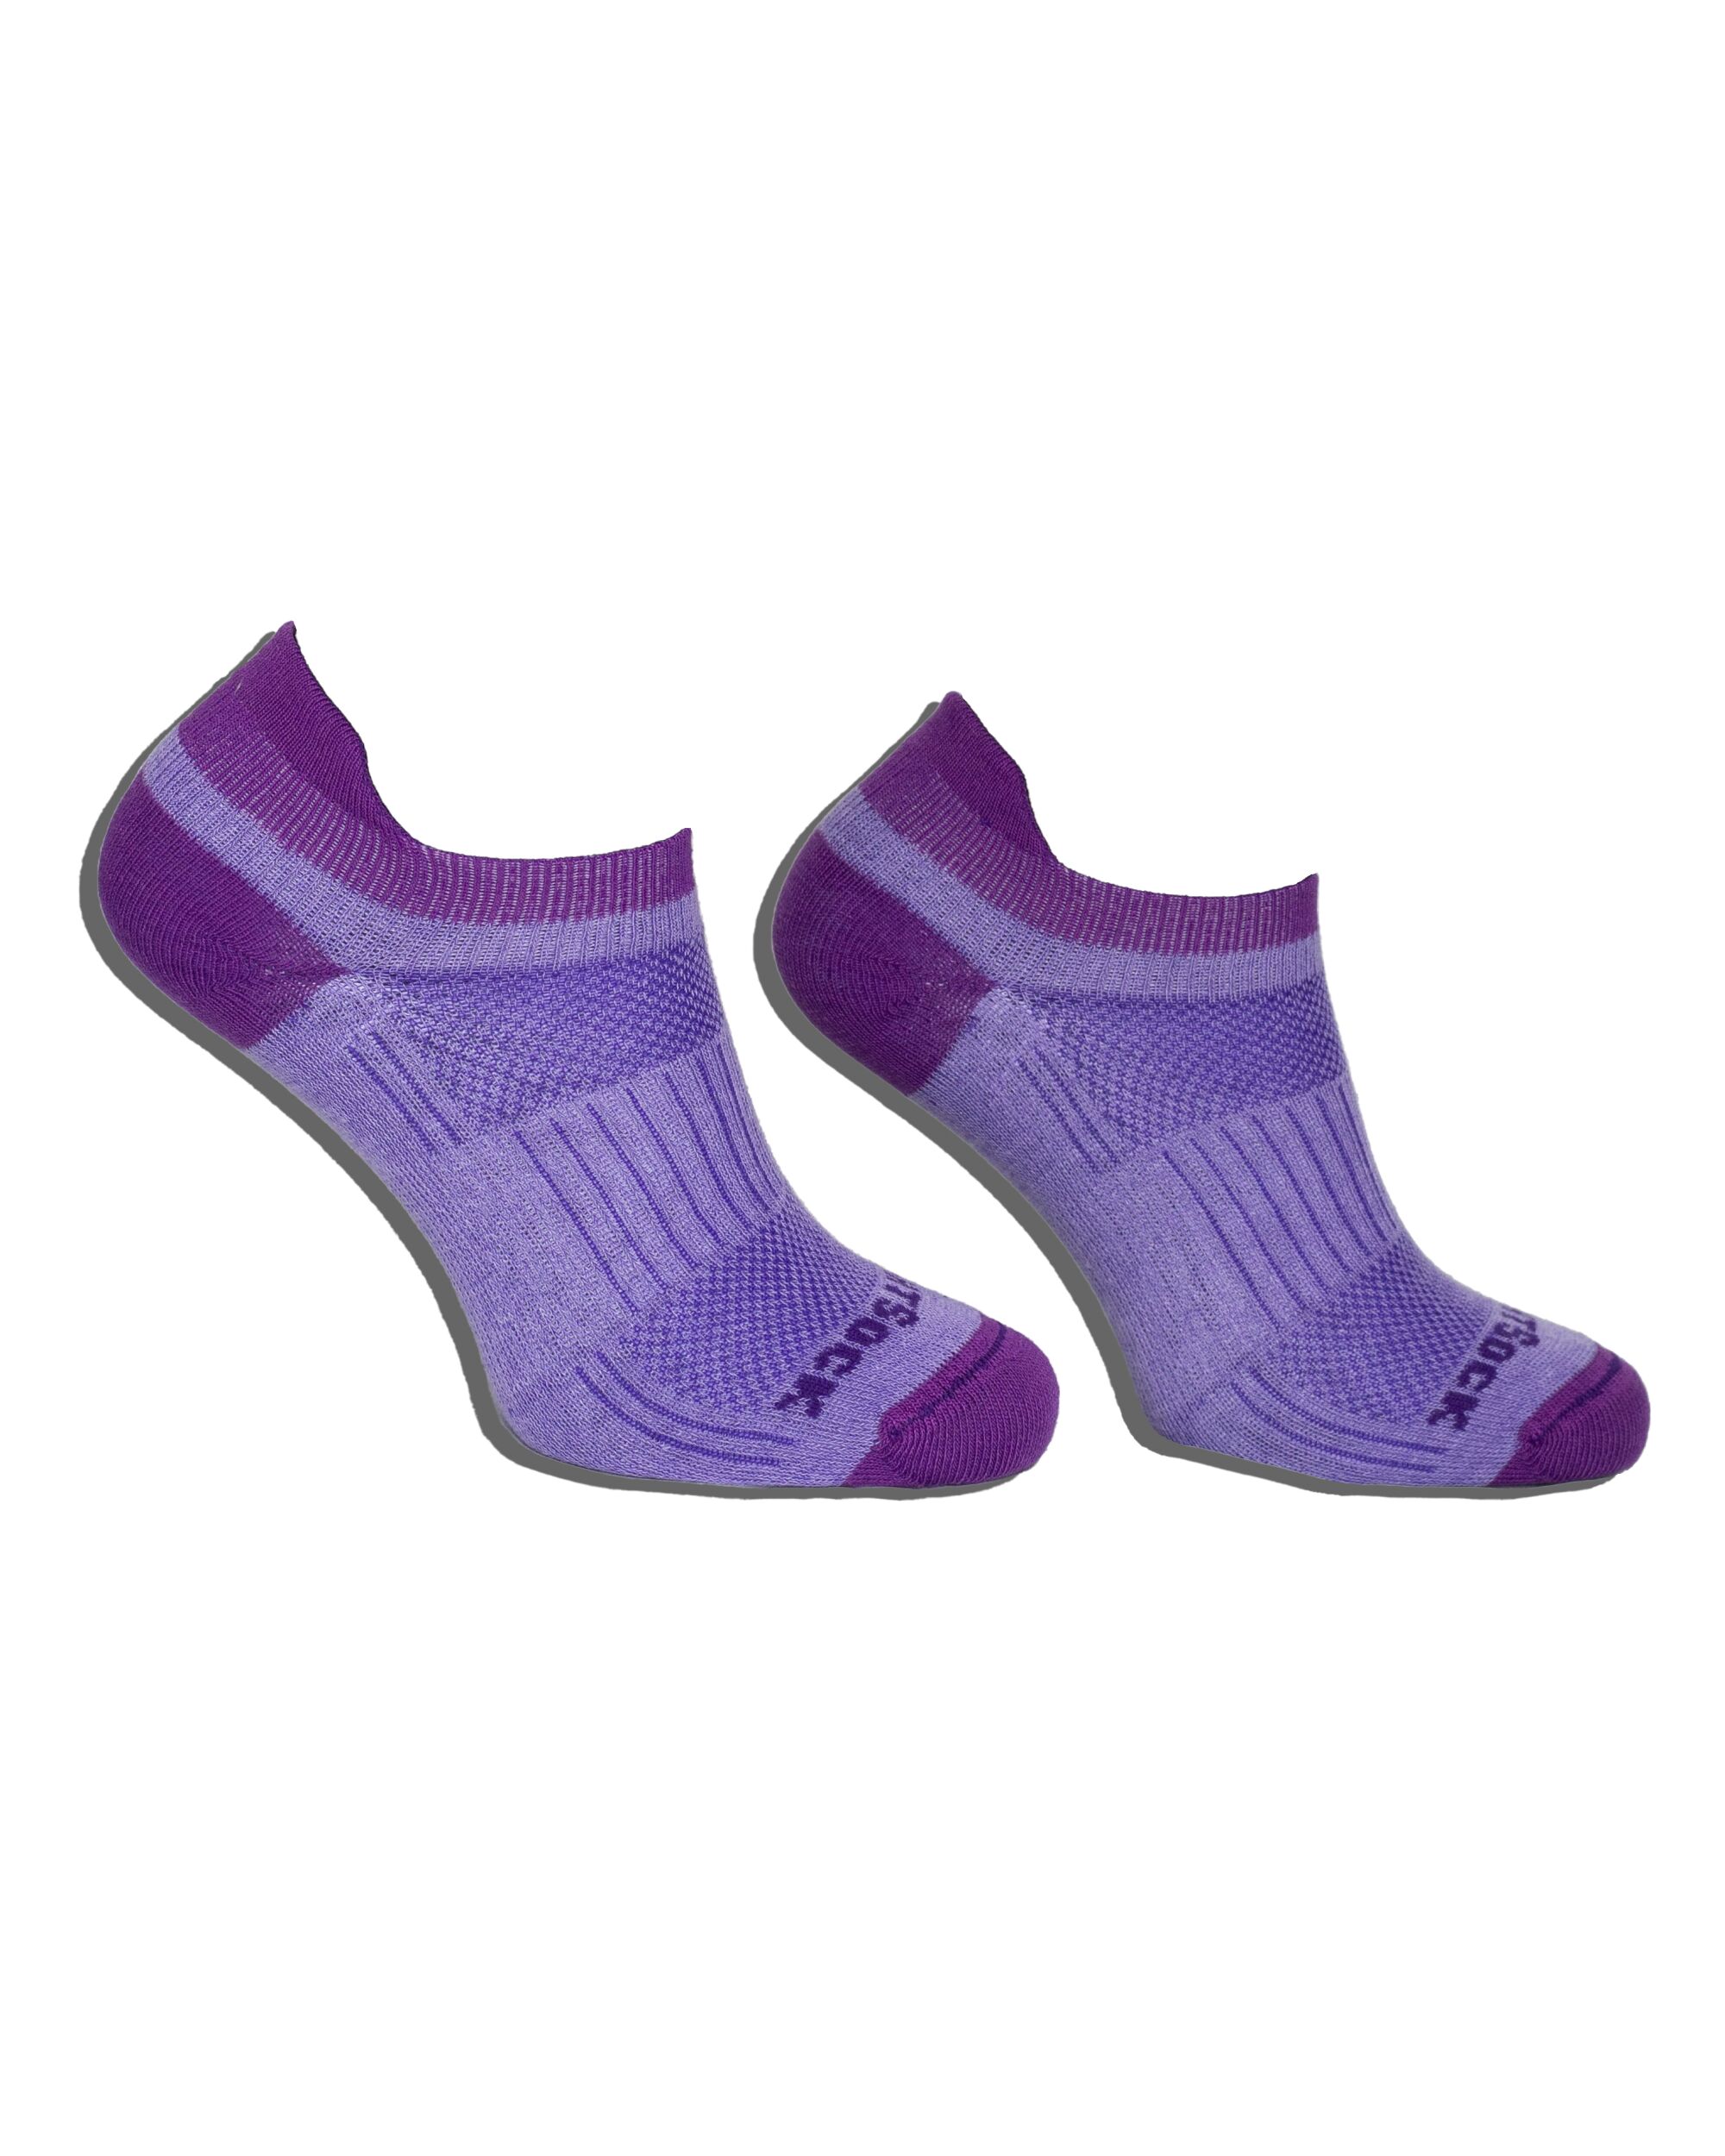 Double Layer Coolmesh II Tab Anti-Blister System sock by WrightSock 